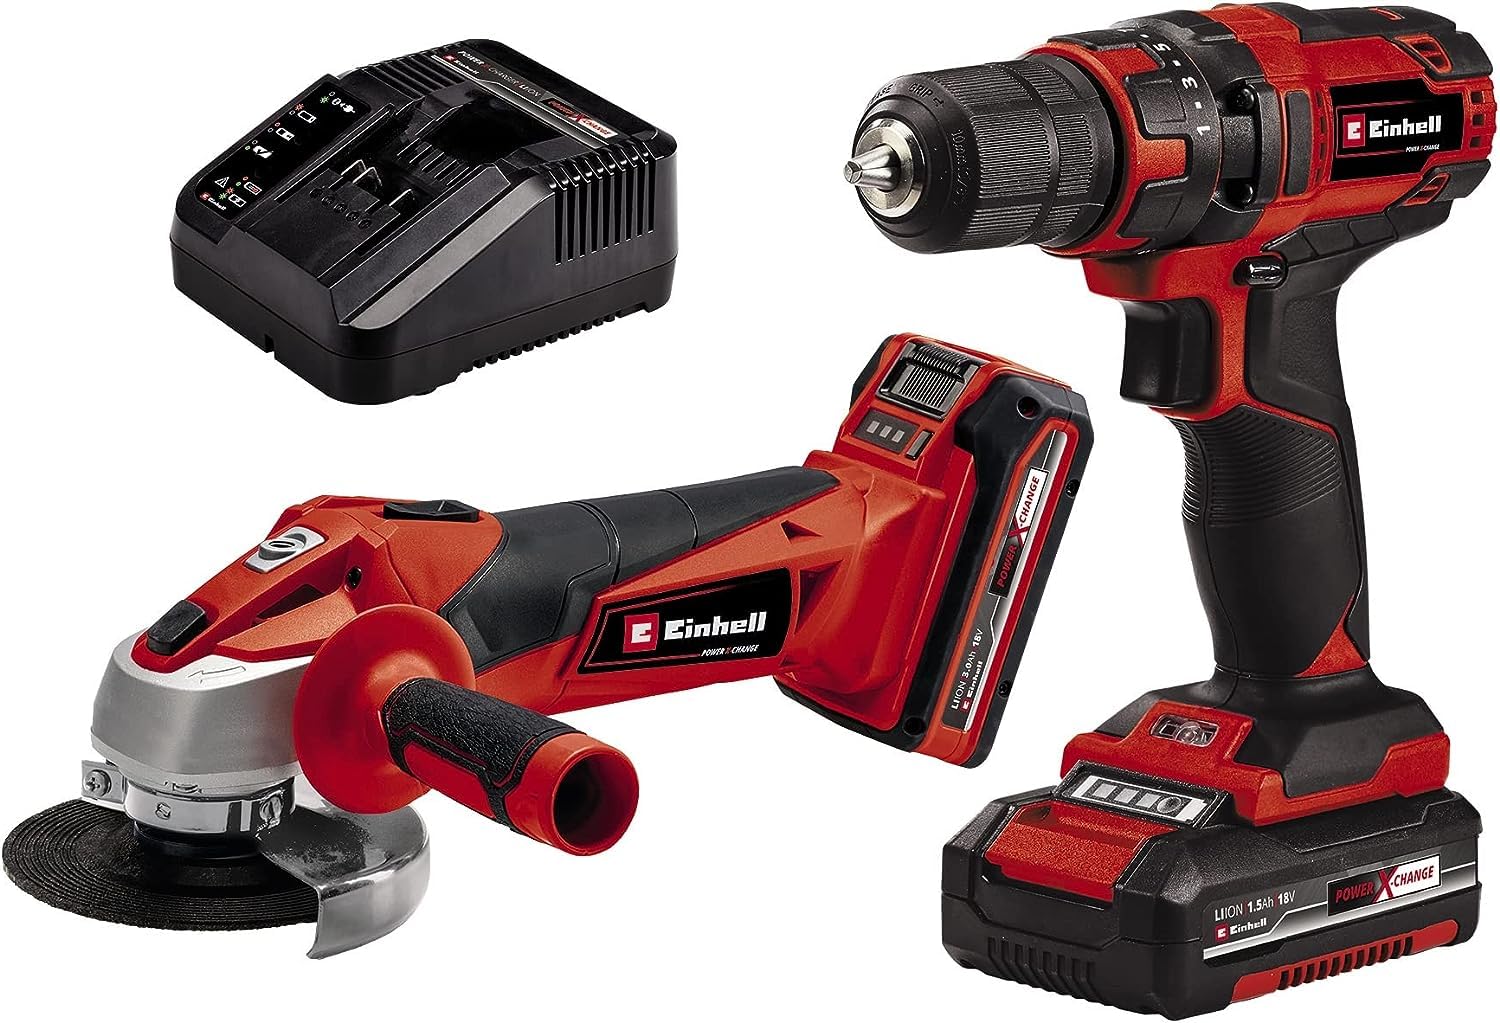 Einhell Power X-Change 18V Cordless Impact Drill And Cordless Angle Grinder With 2 x Batteries And Charger - Classic Power Tool Set - Battery Powered Twin Pack Combi Drill And Angle Grinder